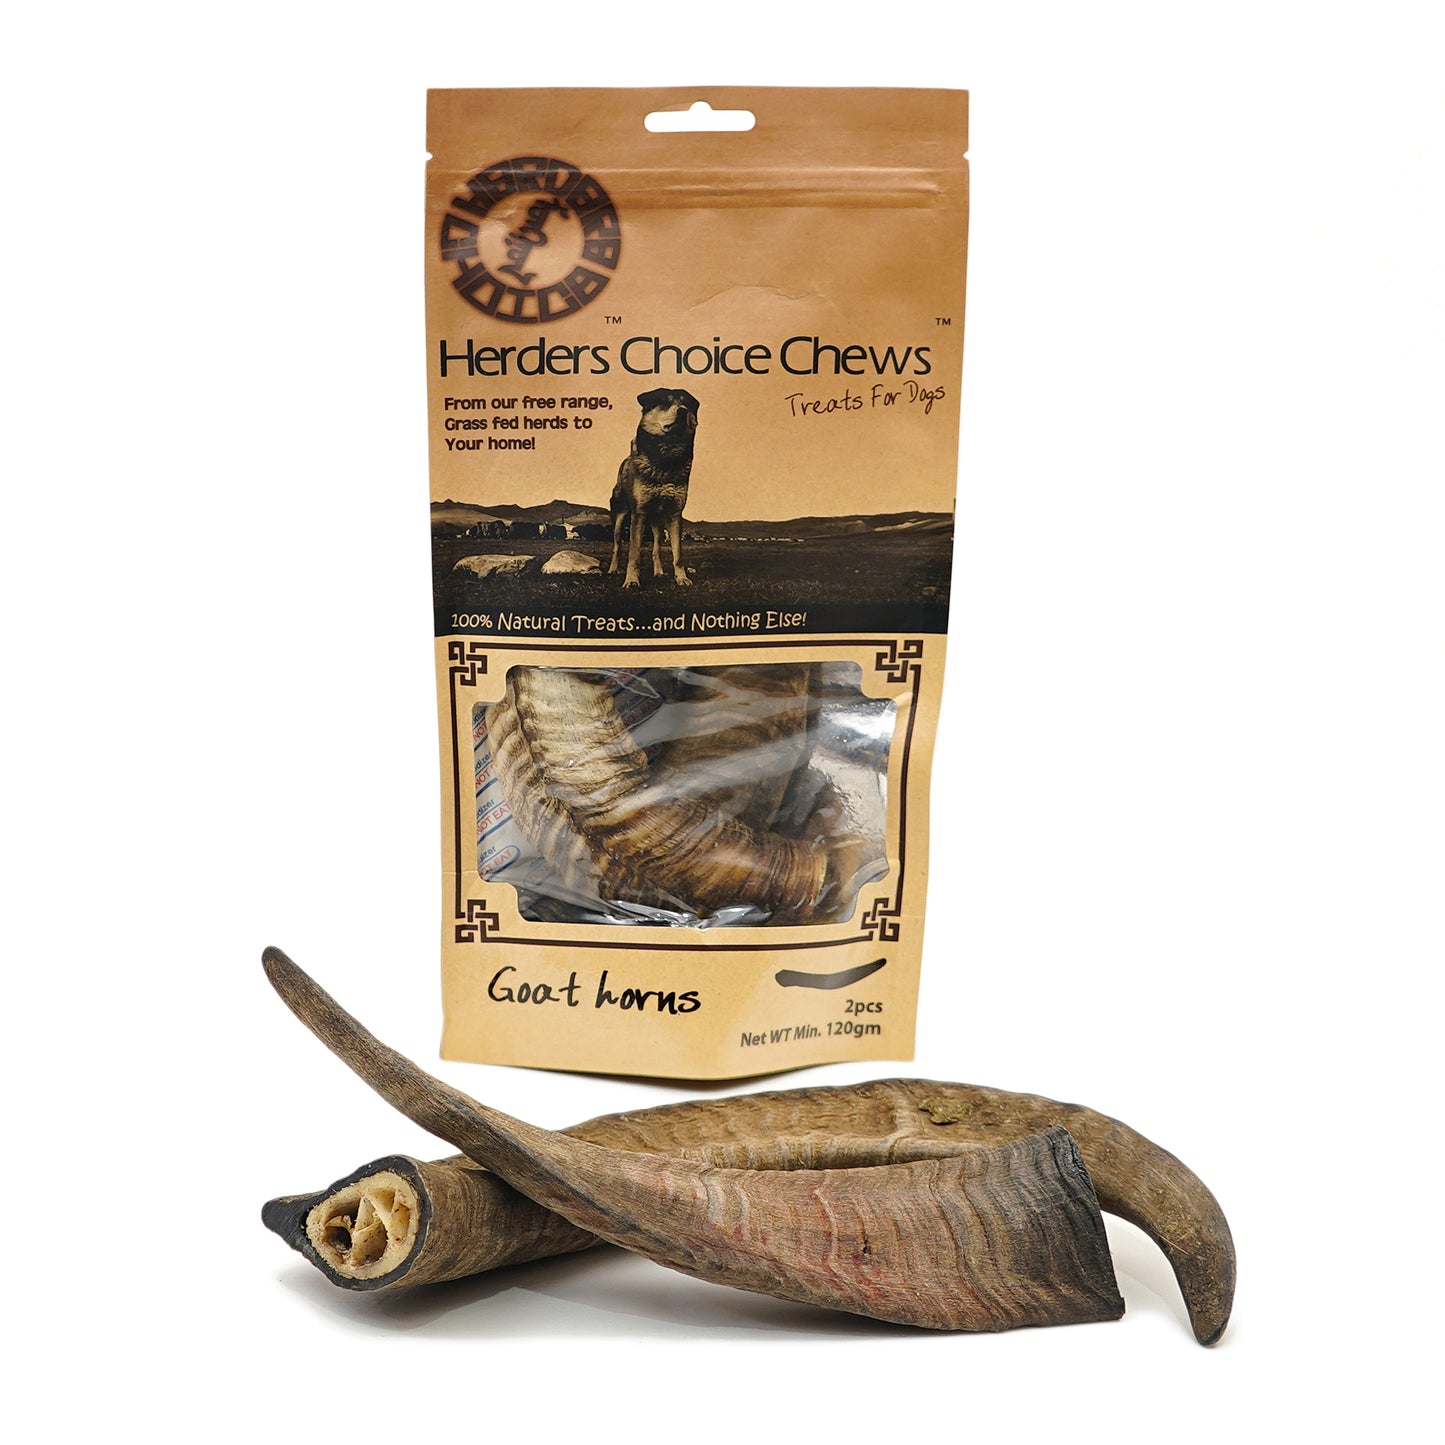 Herders Choice Chews Dried Goat Horns for Dogs 2pcs.  Retail - Mongolian Chews